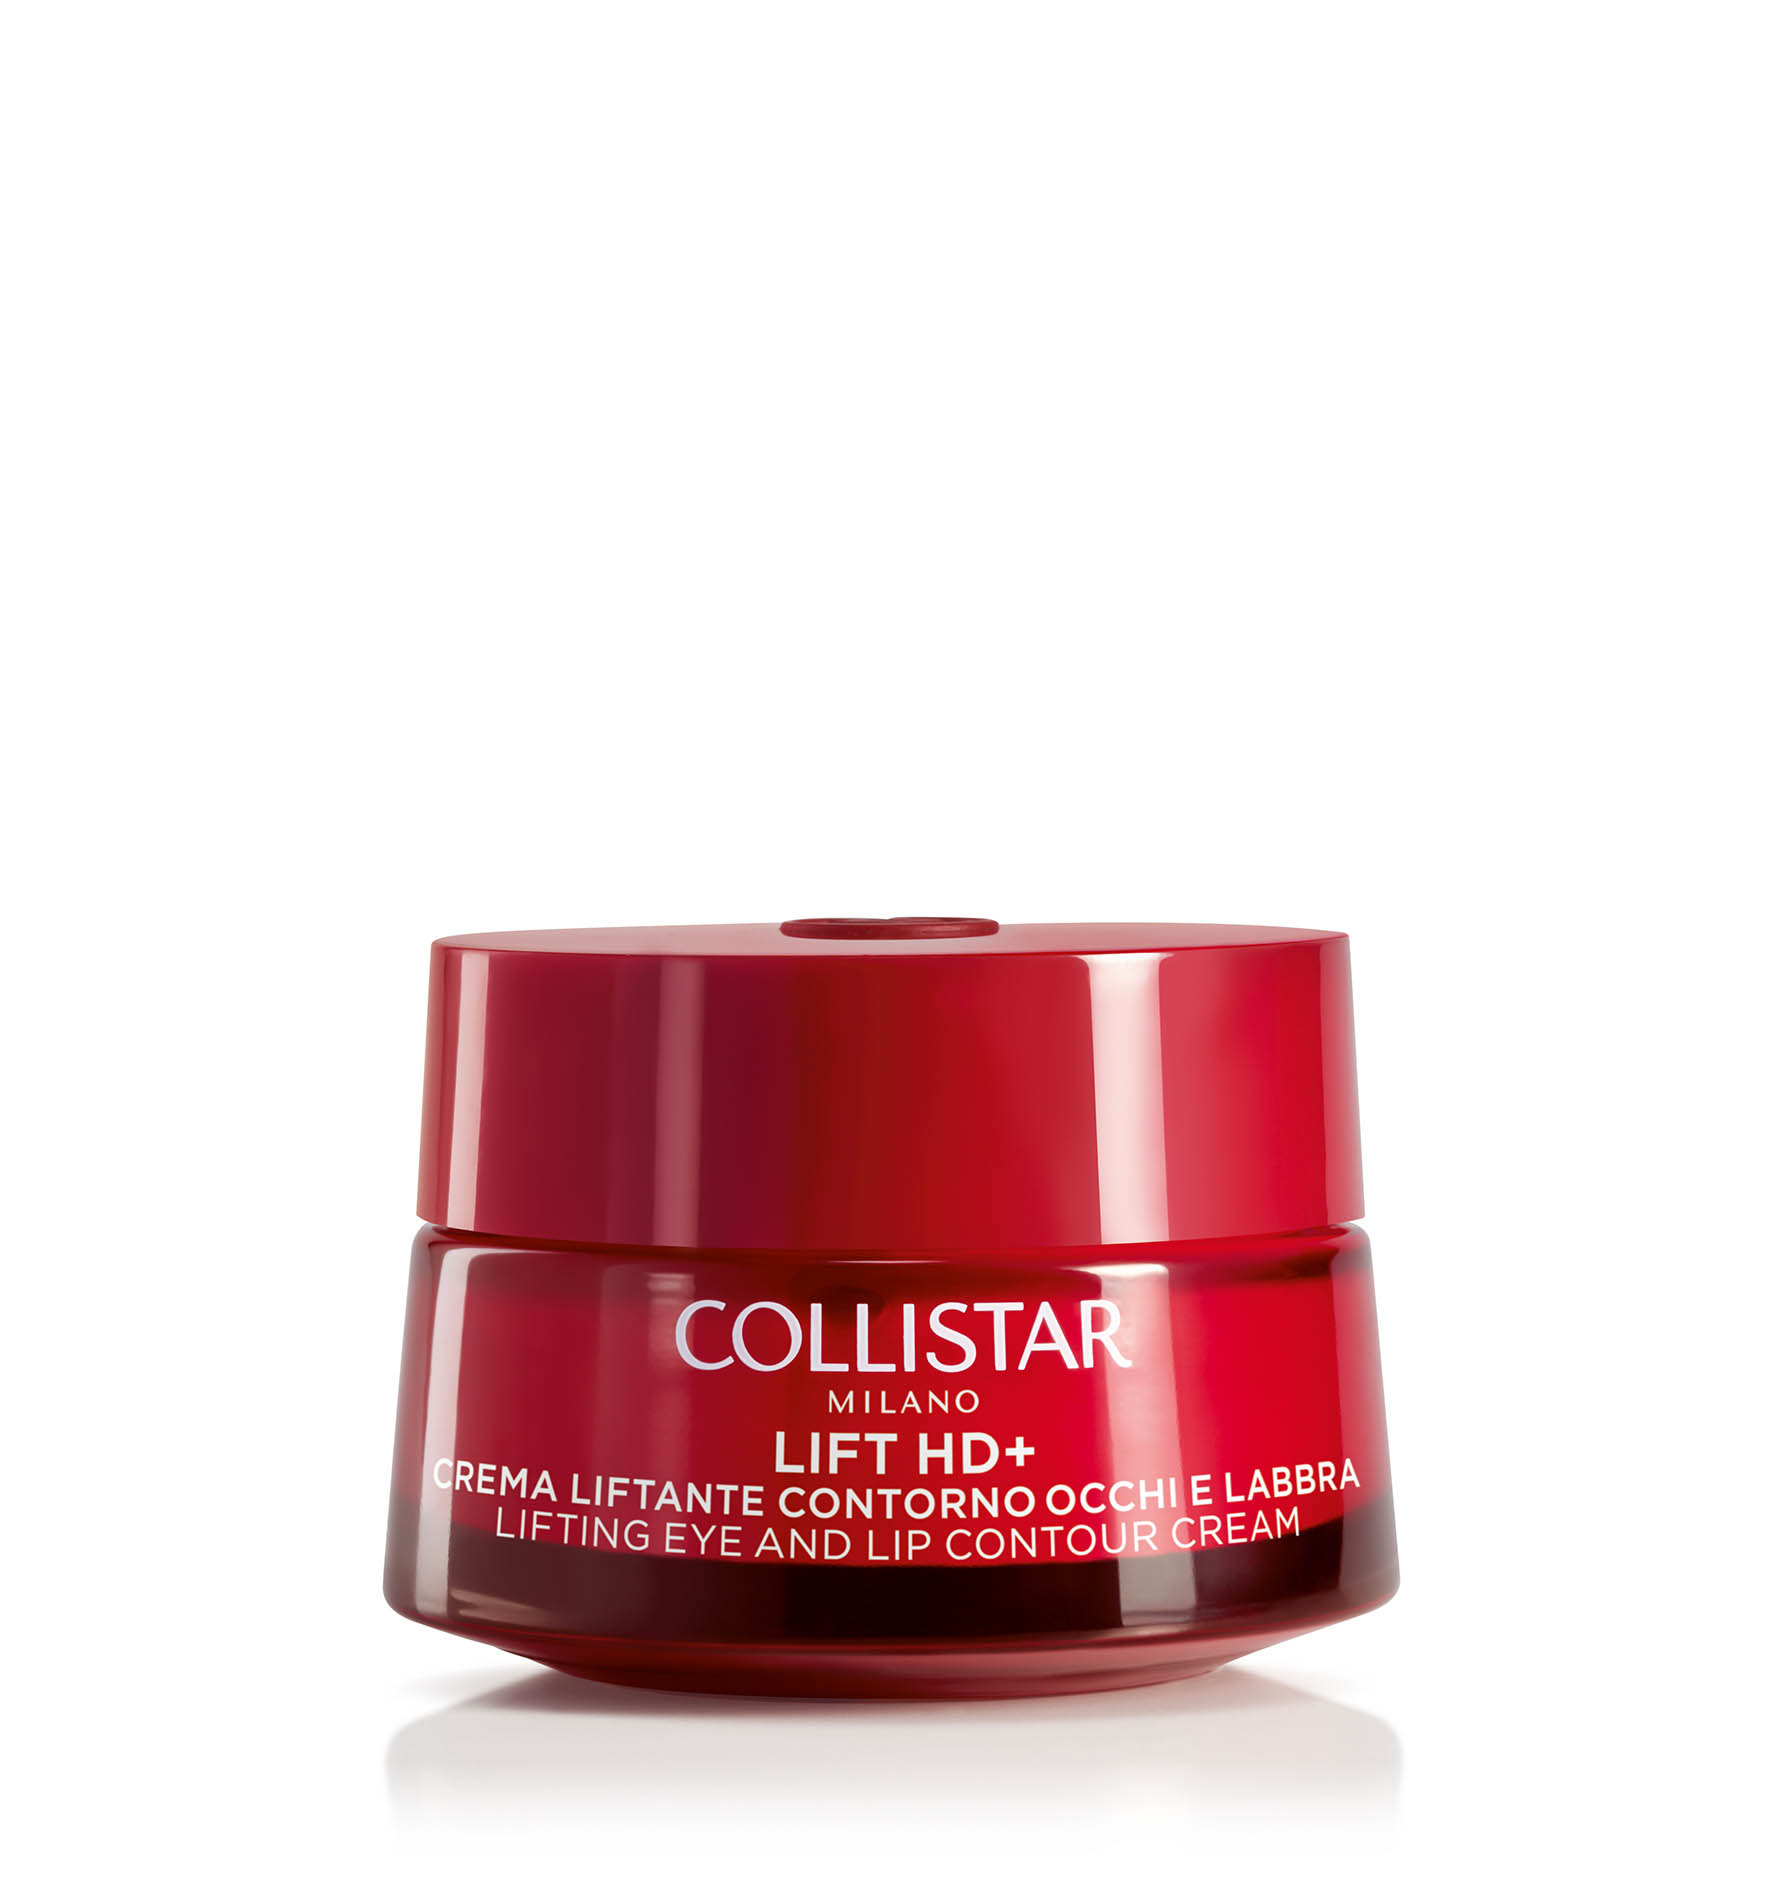 LIFT HD+ LIFTING EYE AND LIP CONTOUR CREAM - Eye and Lip Contour | Collistar - Shop Online Ufficiale